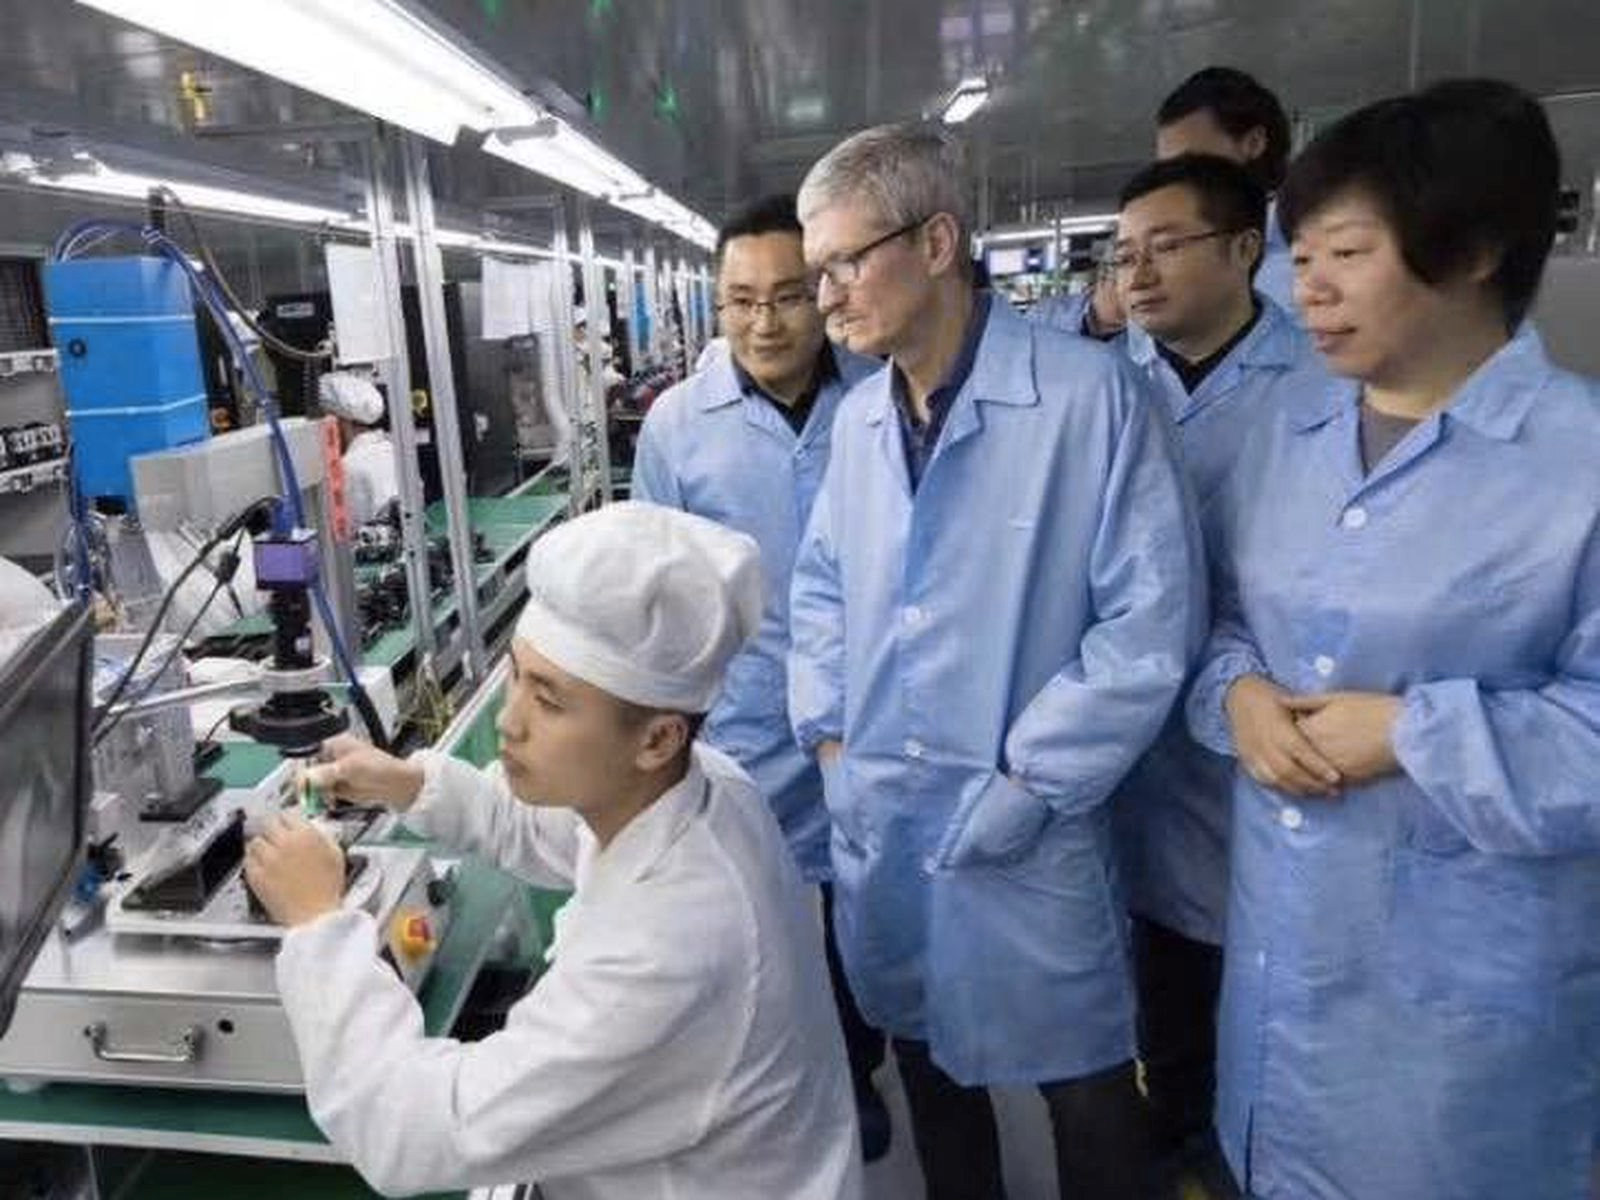 apple-iphone-production-waiting-to-start-in-vietnam.jpg